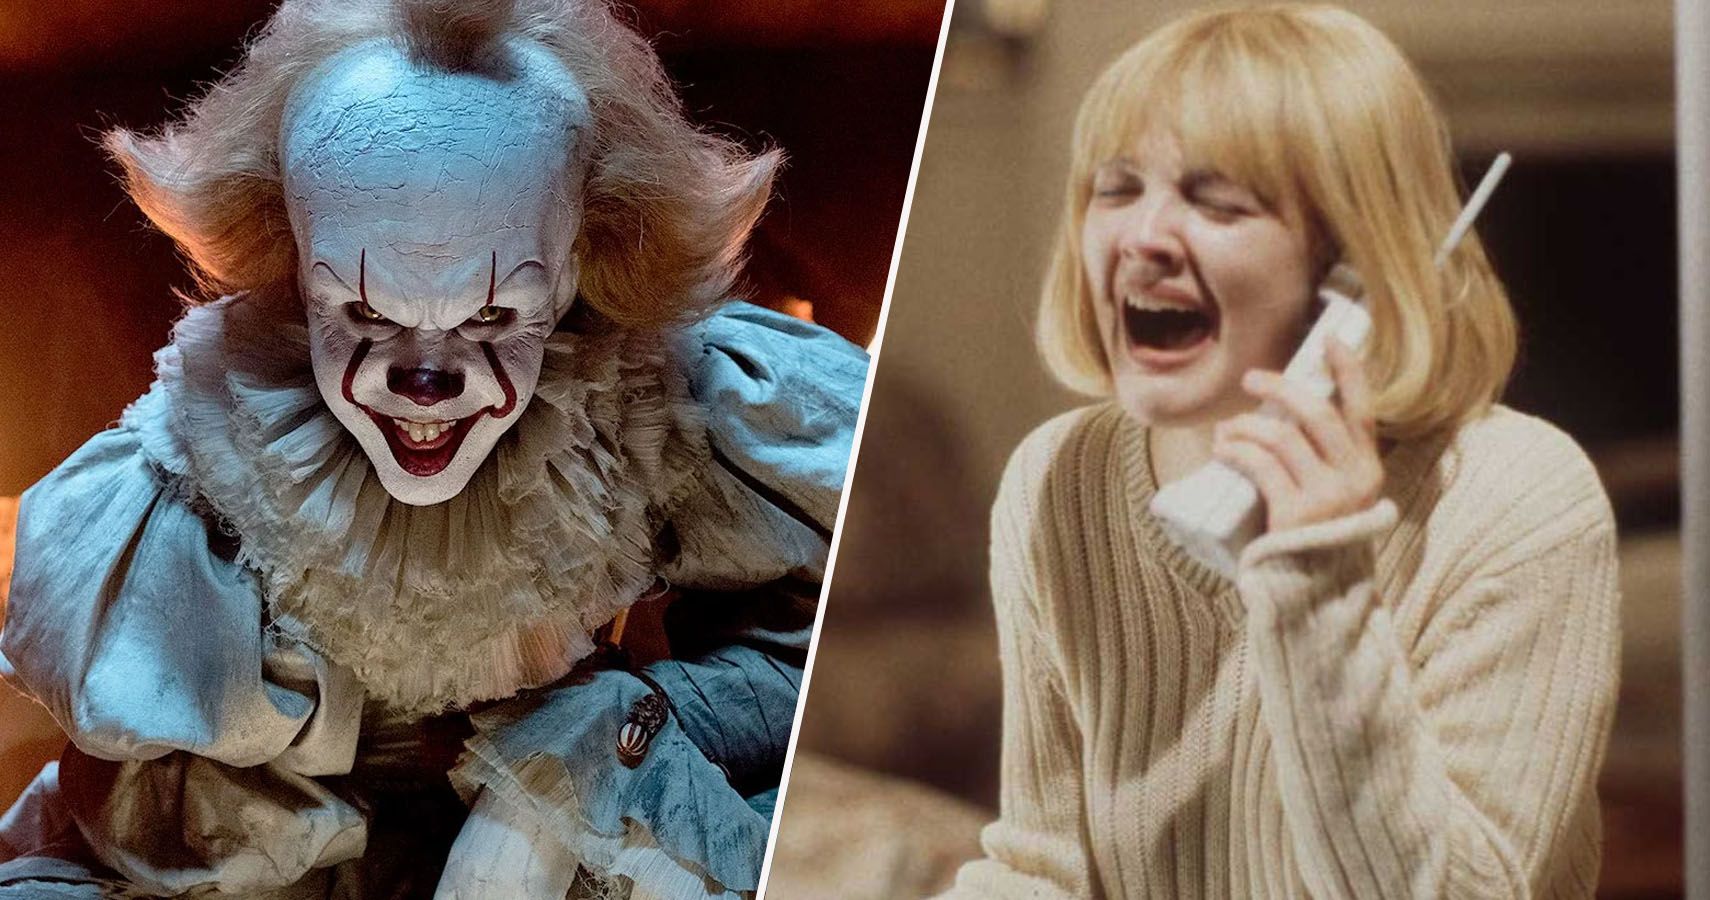 ranking-the-scariest-horror-movie-moments-from-worst-to-best